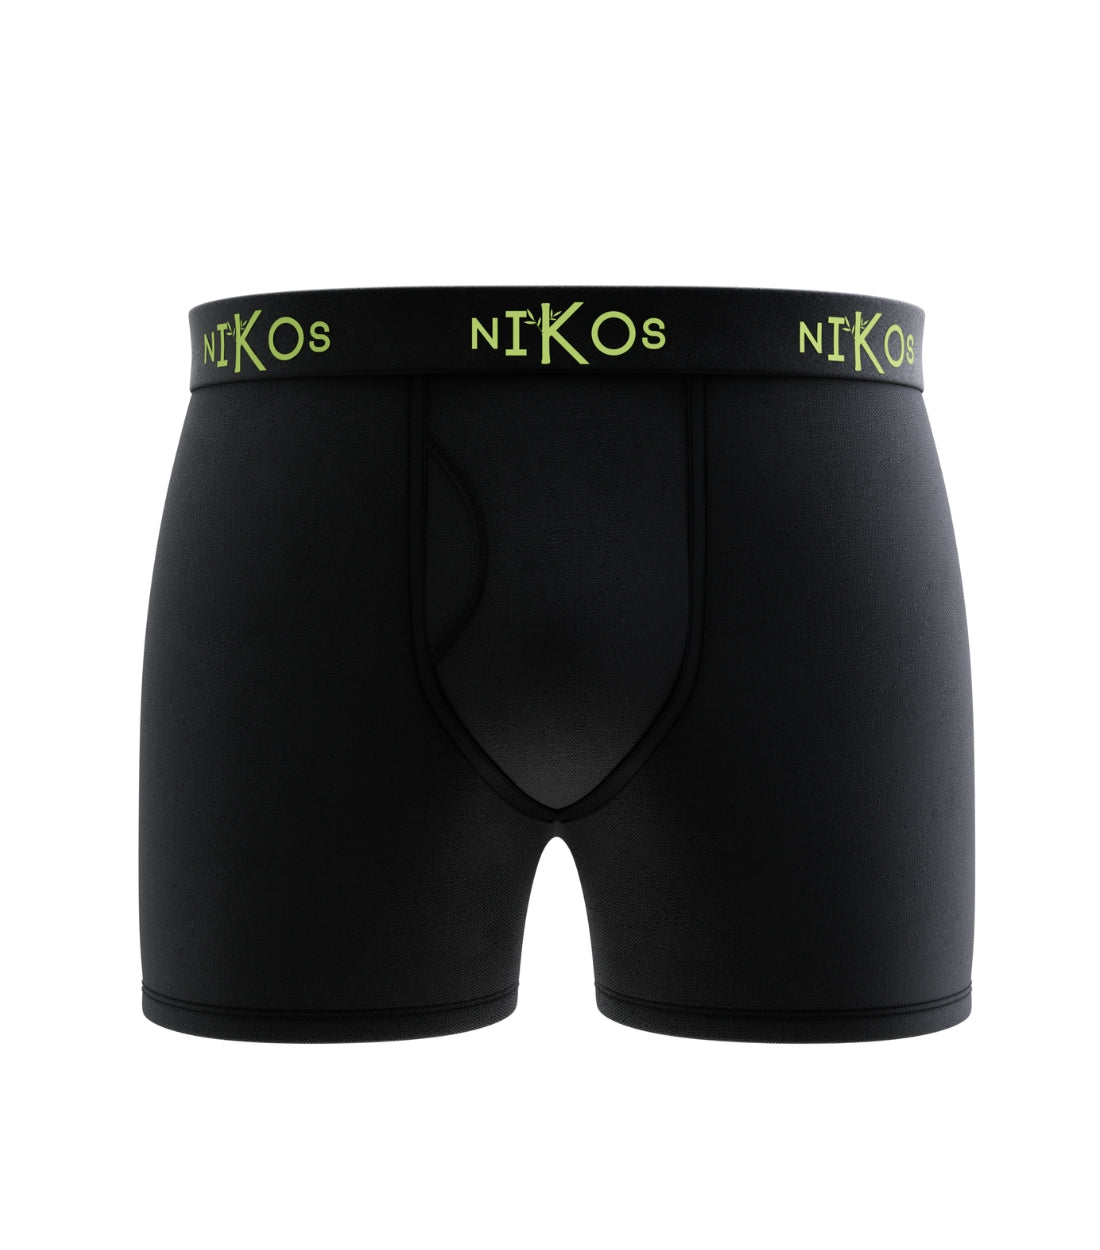 Close-up view of Nikos Bamboo Boxer Briefs in black